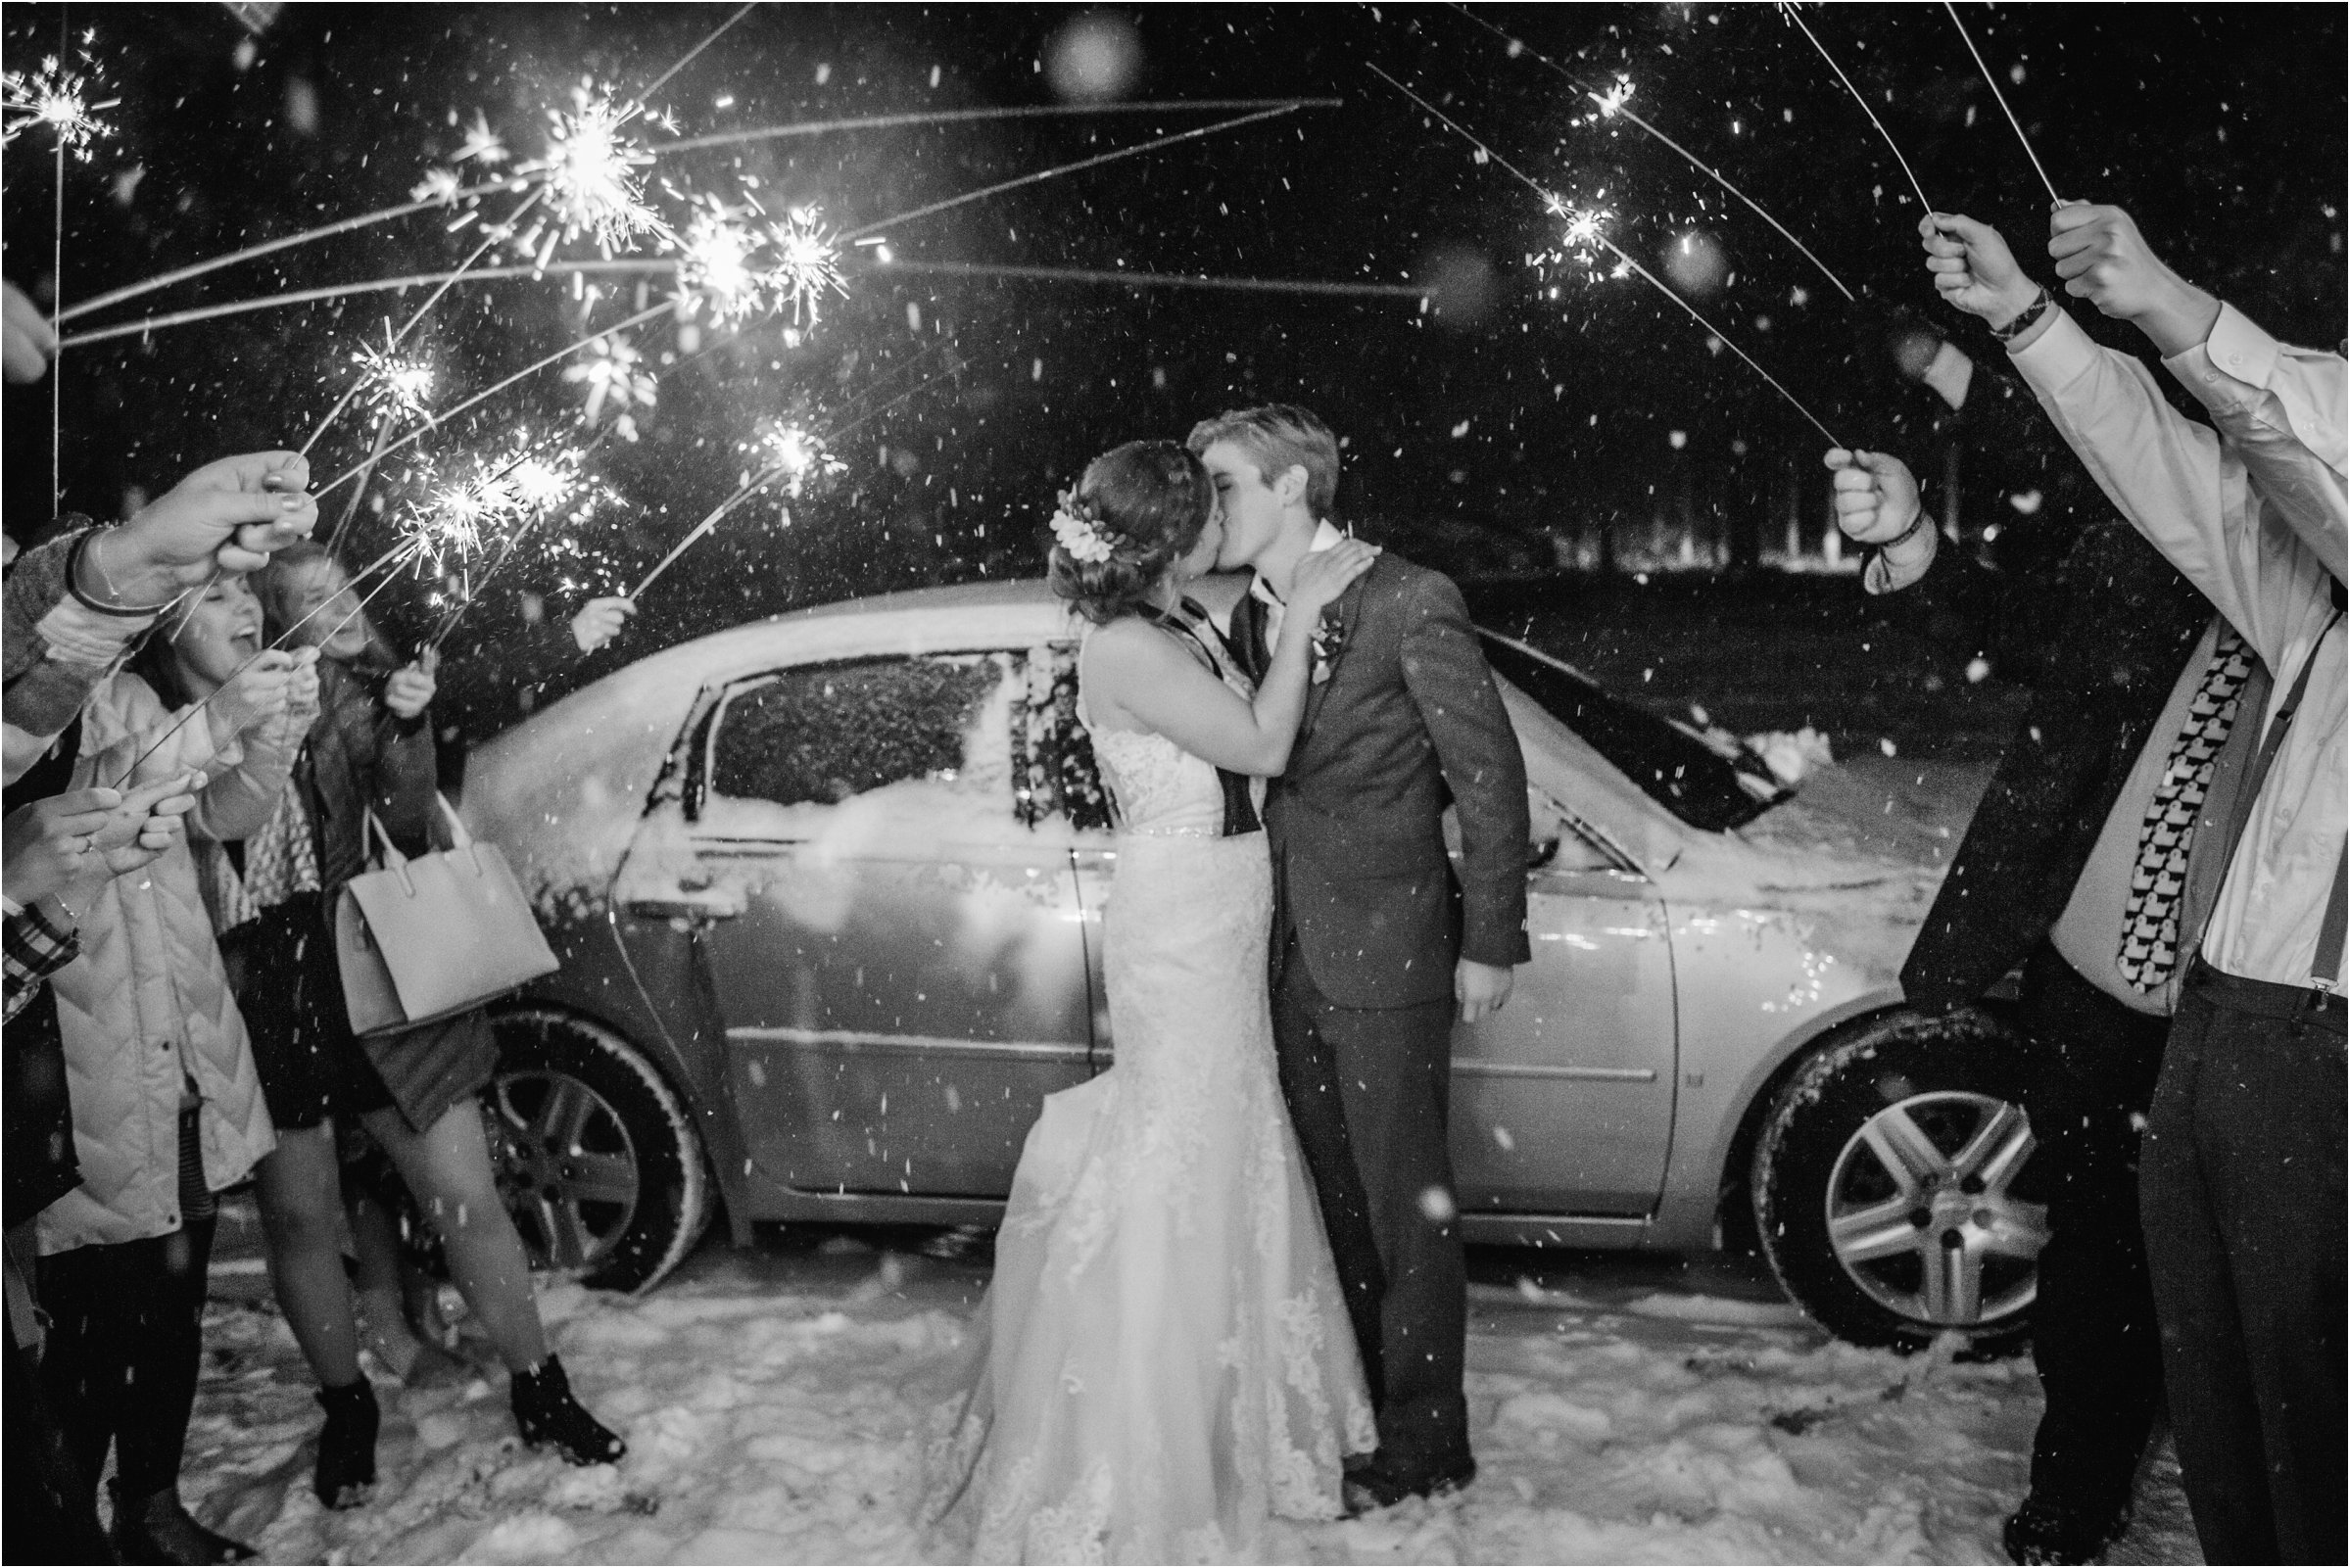 Bride and groom with sparklers above them as they head for a car in the night snow